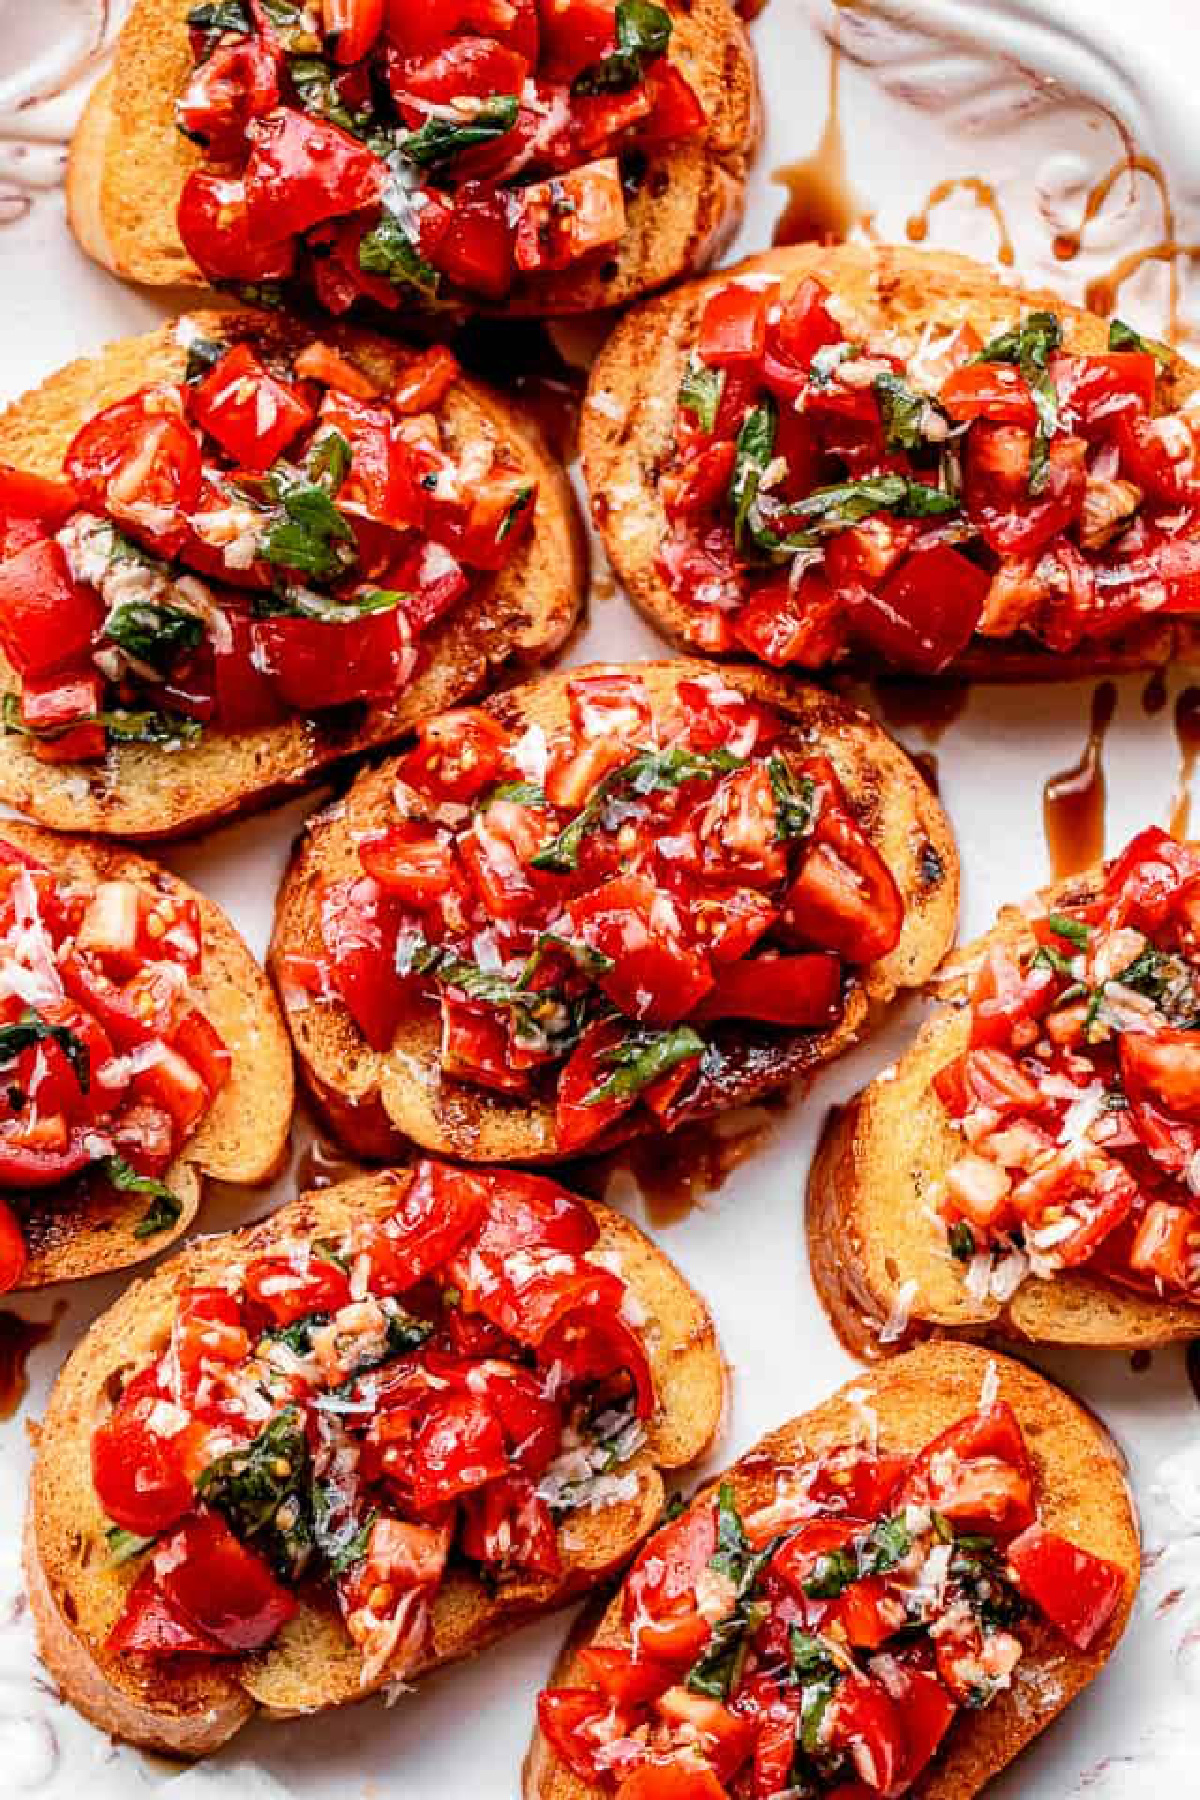 Cheap Party Food - Bruschetta with Tomatoes and Basil